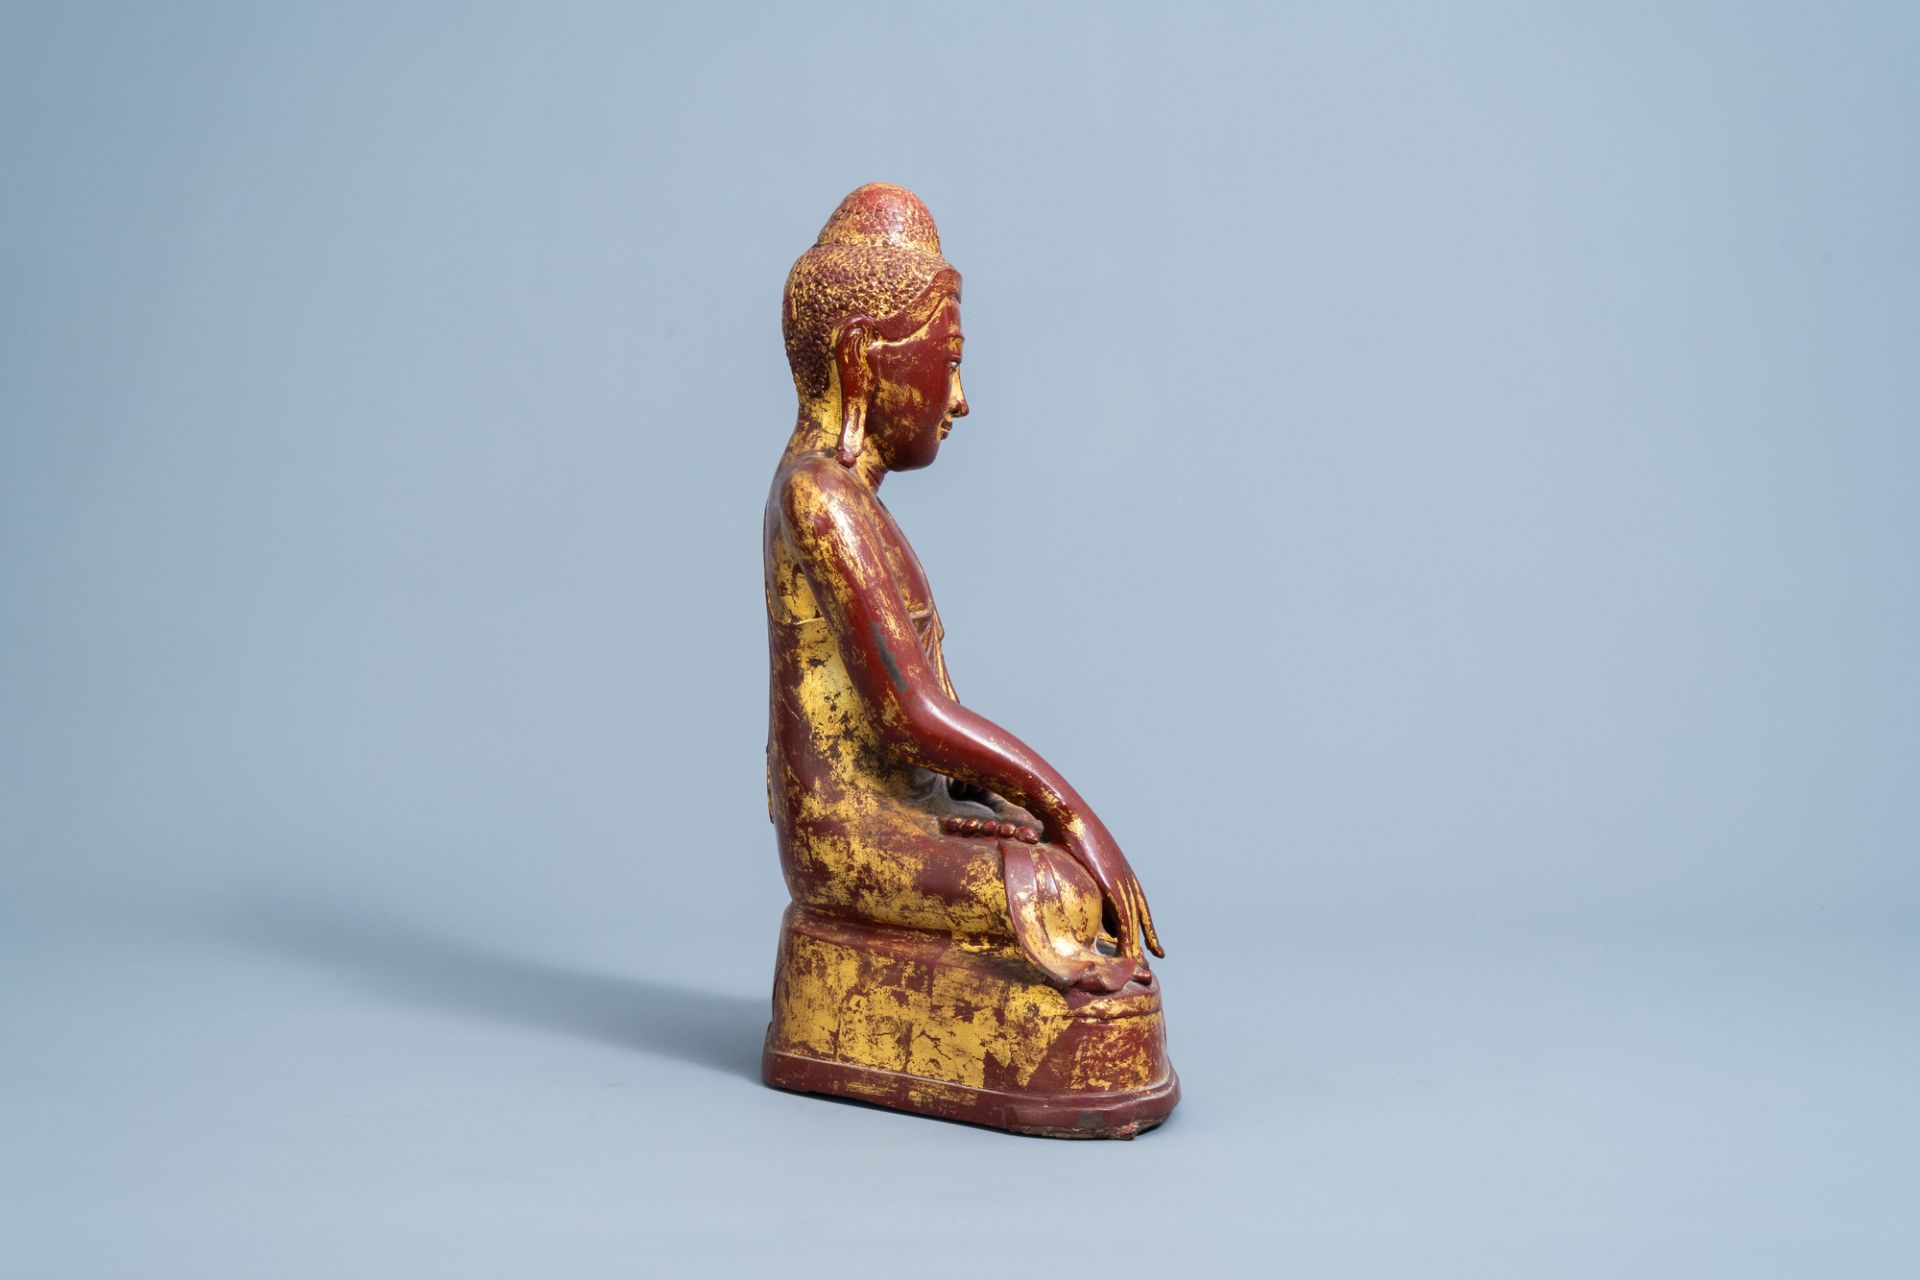 A large gilt and lacquered bronze Buddha figure, Burma, Mandalay period, 19th C. - Image 2 of 4